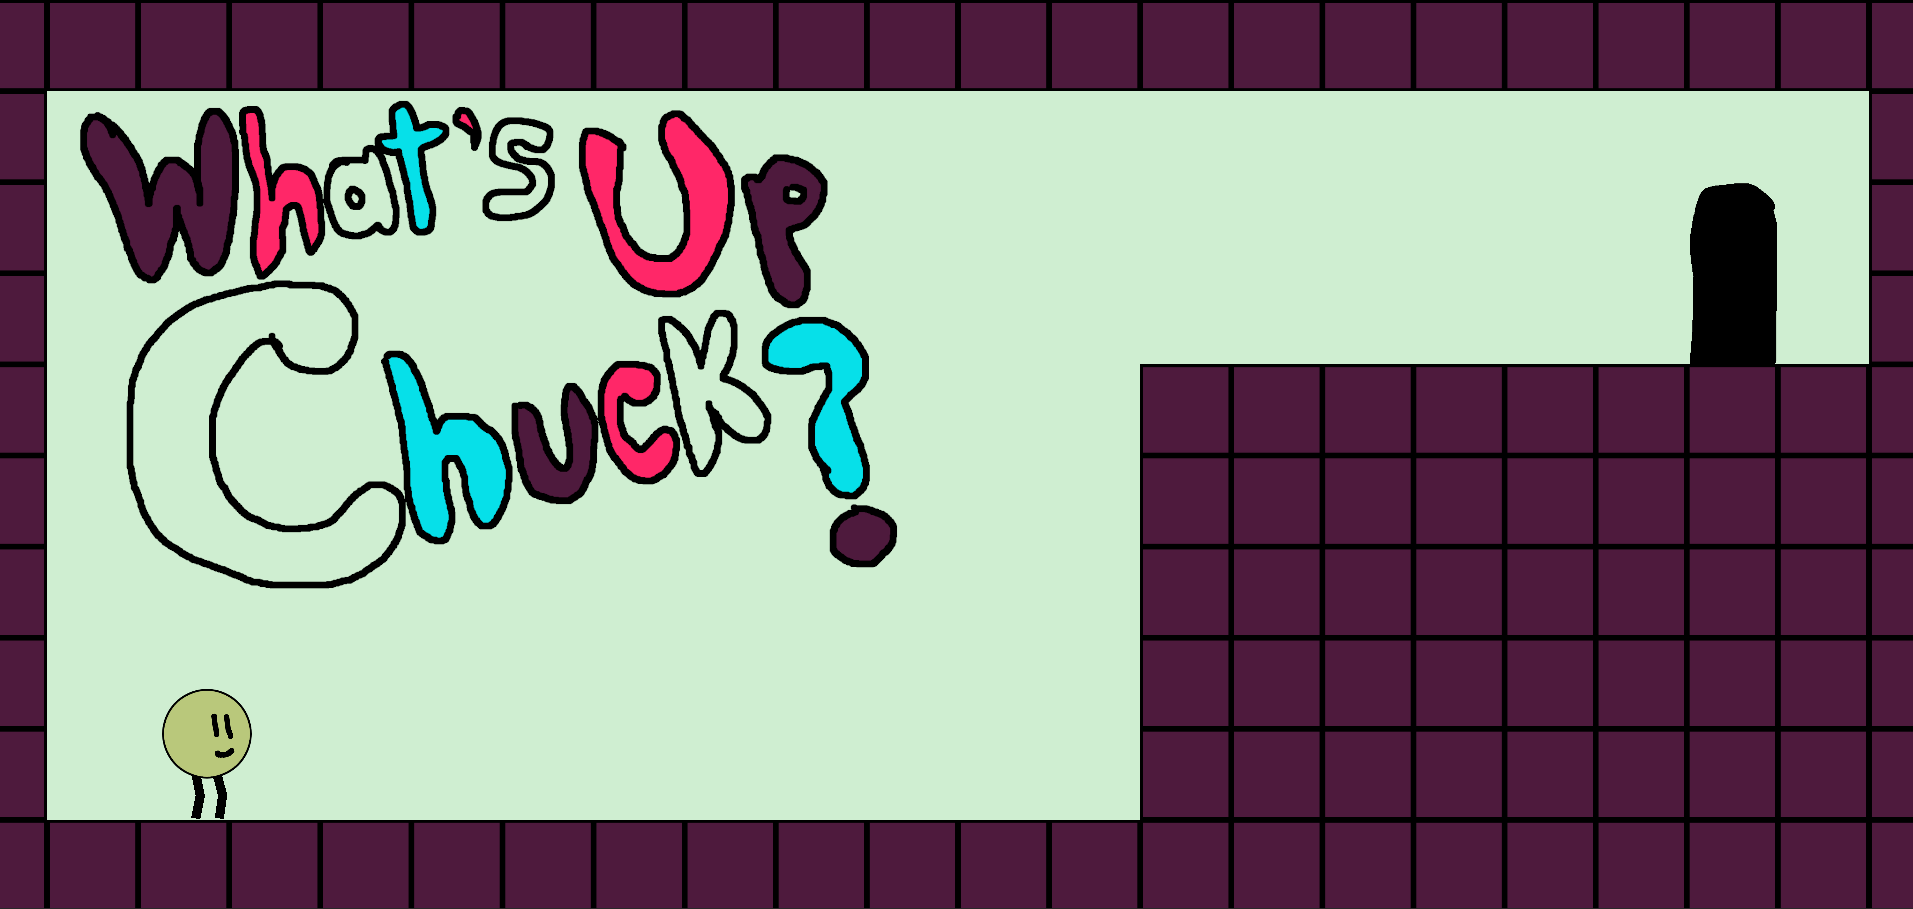 What's Up Chuck (Game Jam version)